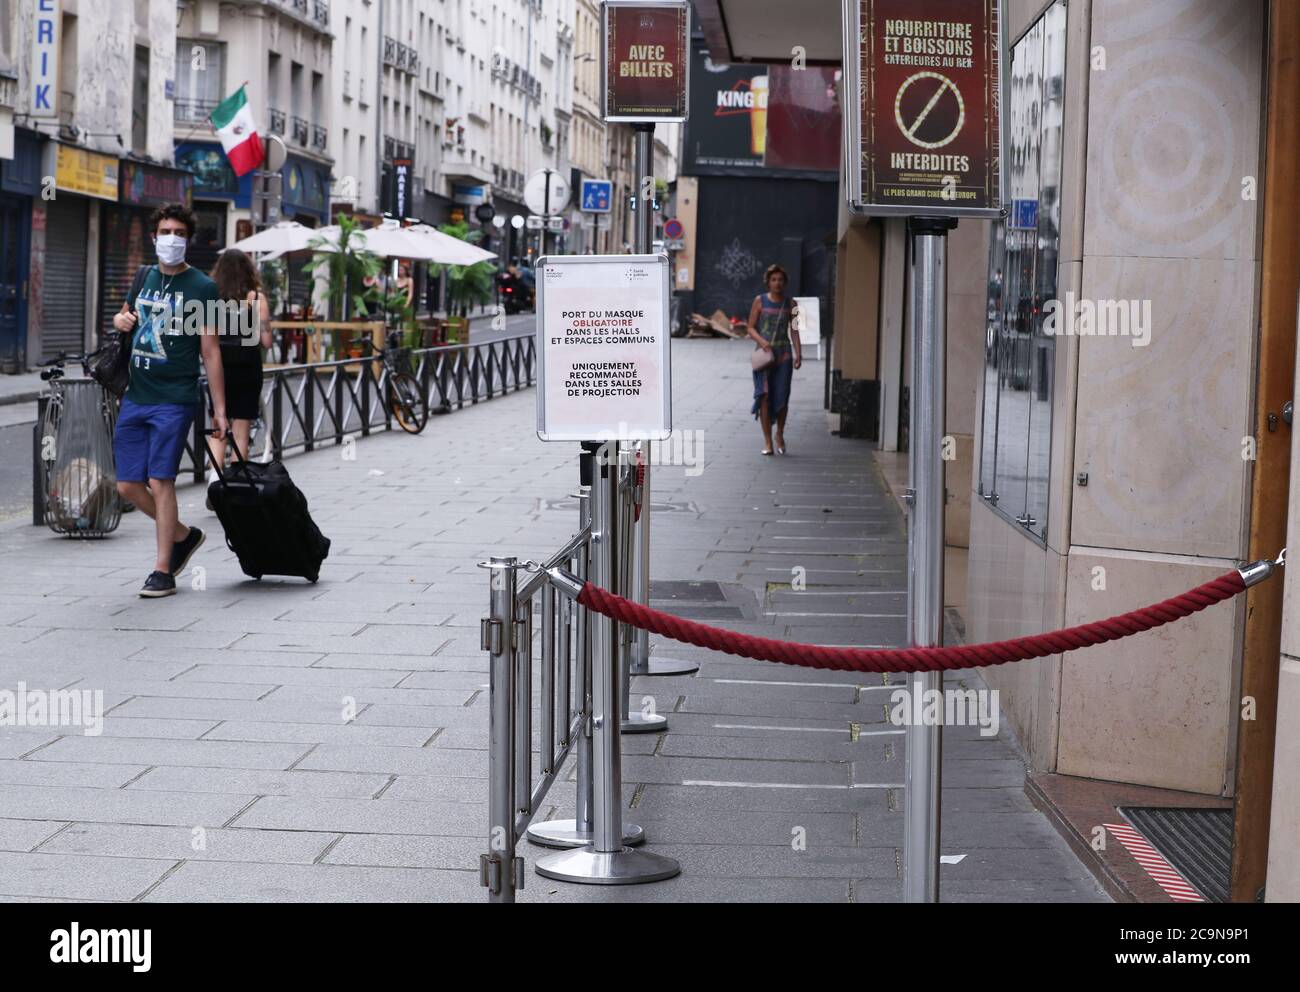 Paris, France. 31st July, 2020. People walk past the Grand Rex film theatre in Paris, France, July 31, 2020. Grand Rex, an iconic French cinema, will shut its doors for the month of August for the lack of audience and summer blockbusters. Credit: Gao Jing/Xinhua/Alamy Live News Stock Photo